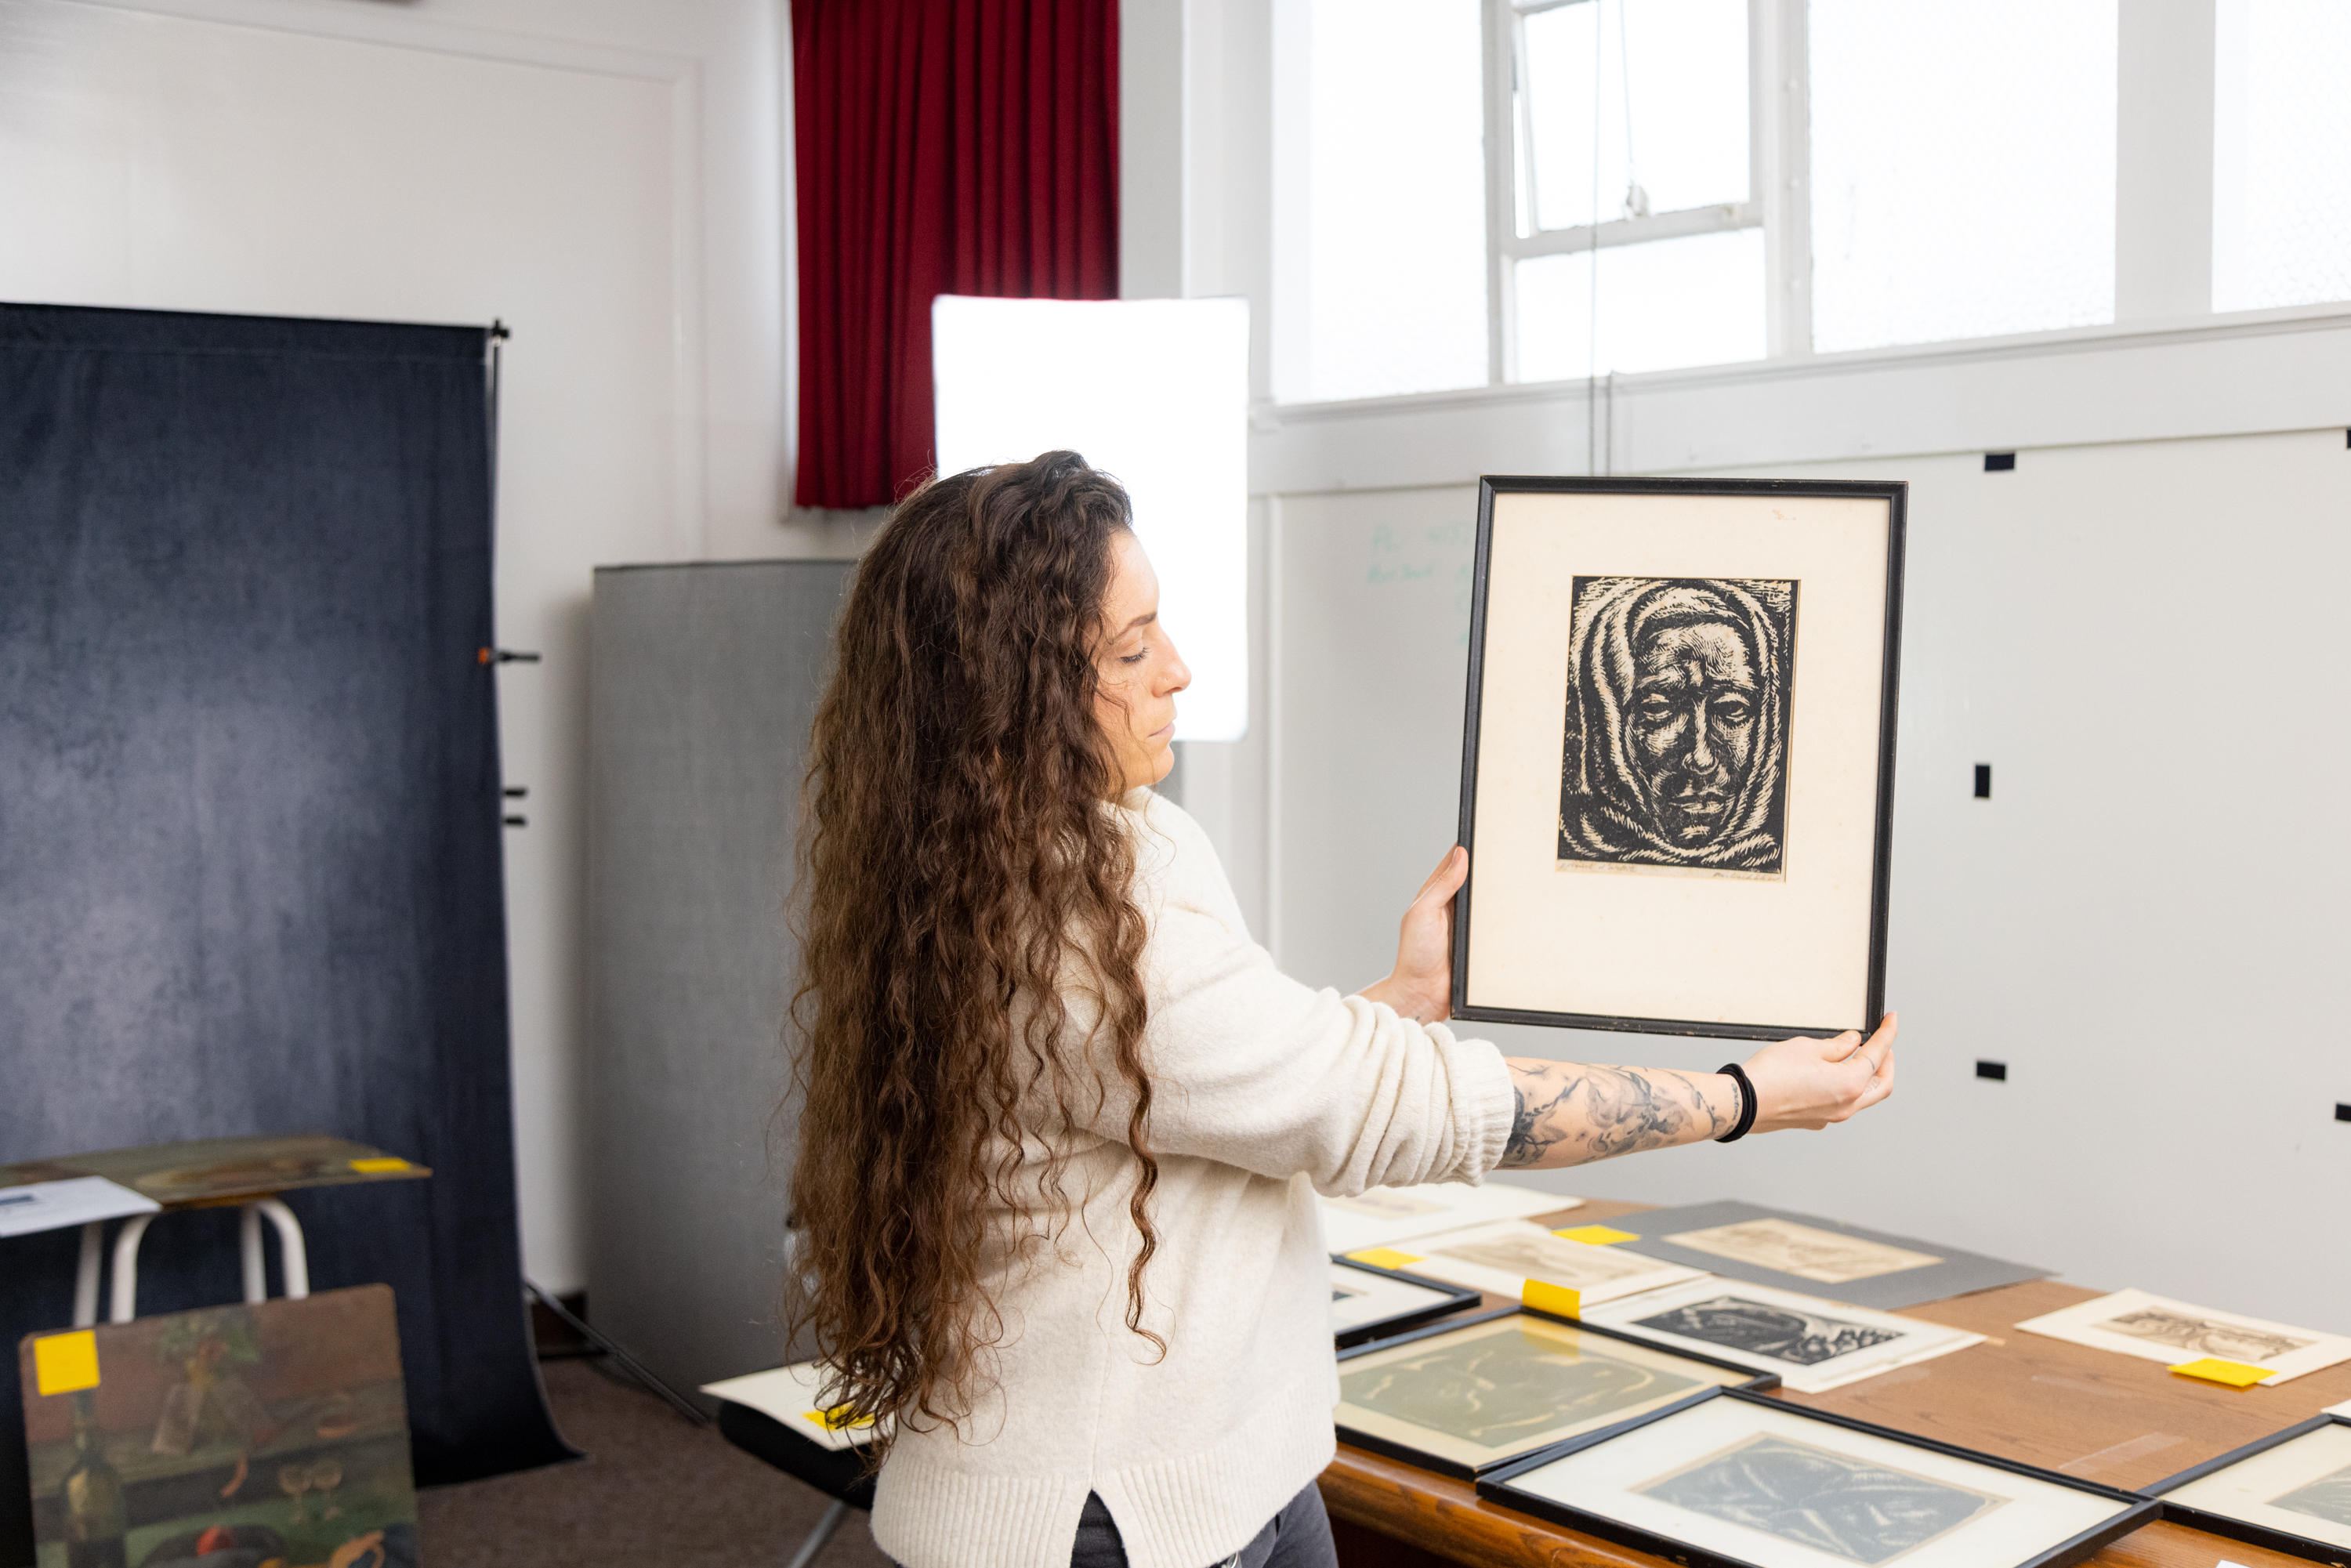 A woman holding a framed print of a face, standing near a table with more artwork.